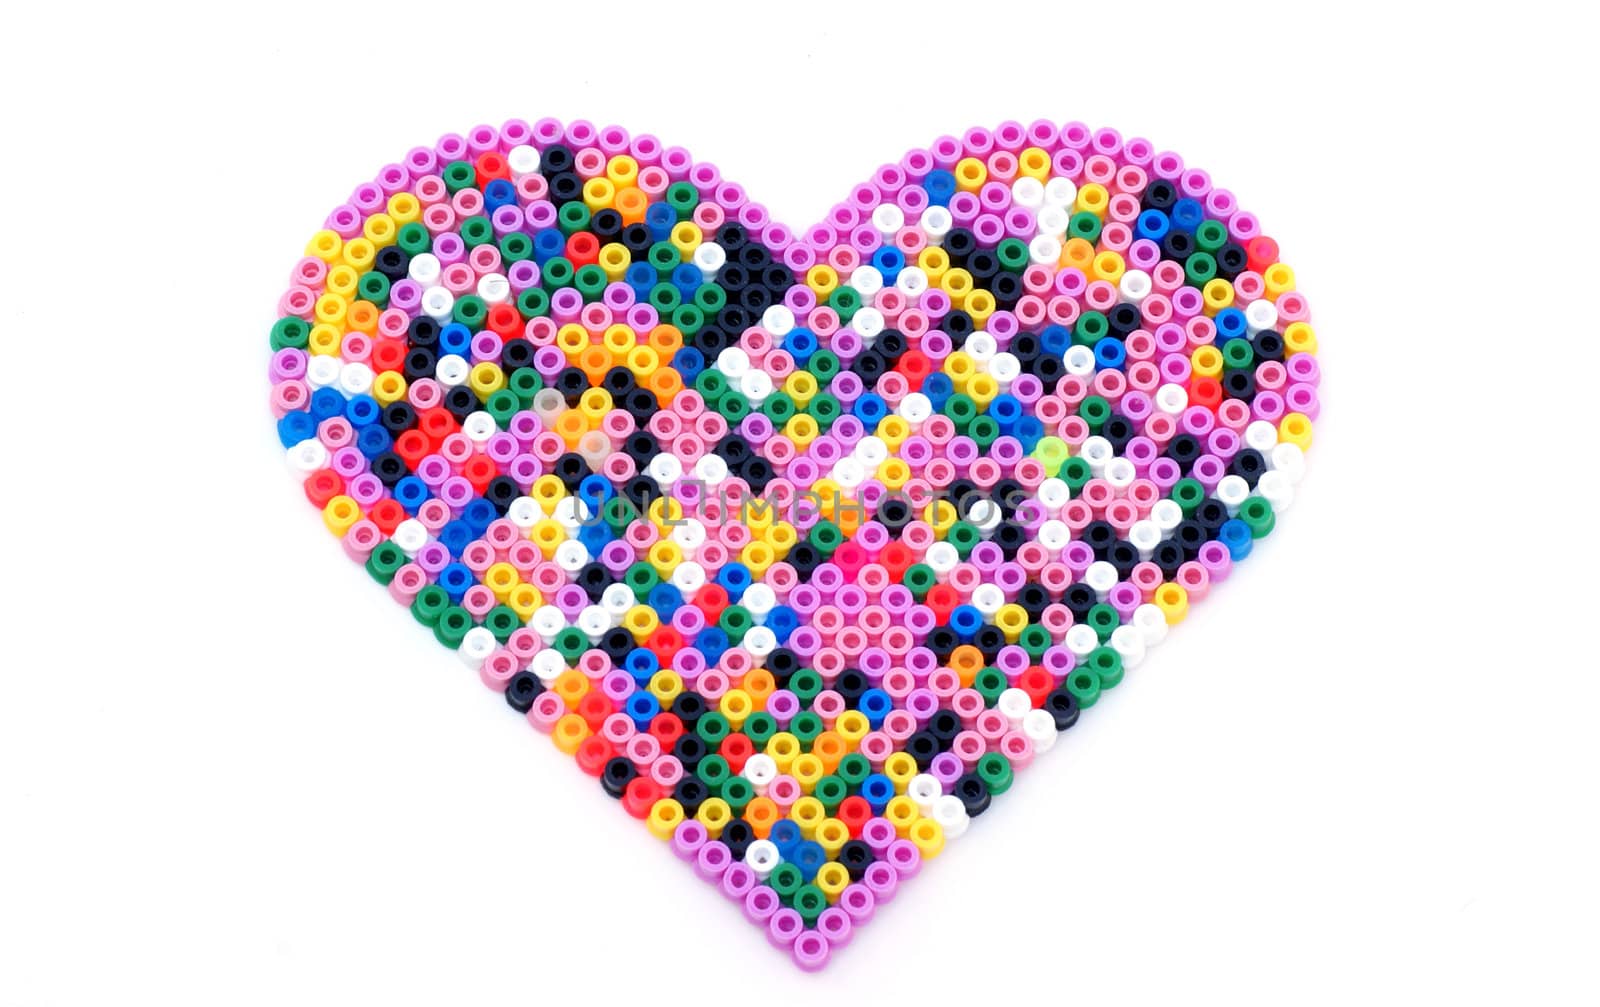 The shape of a heart in many colors.